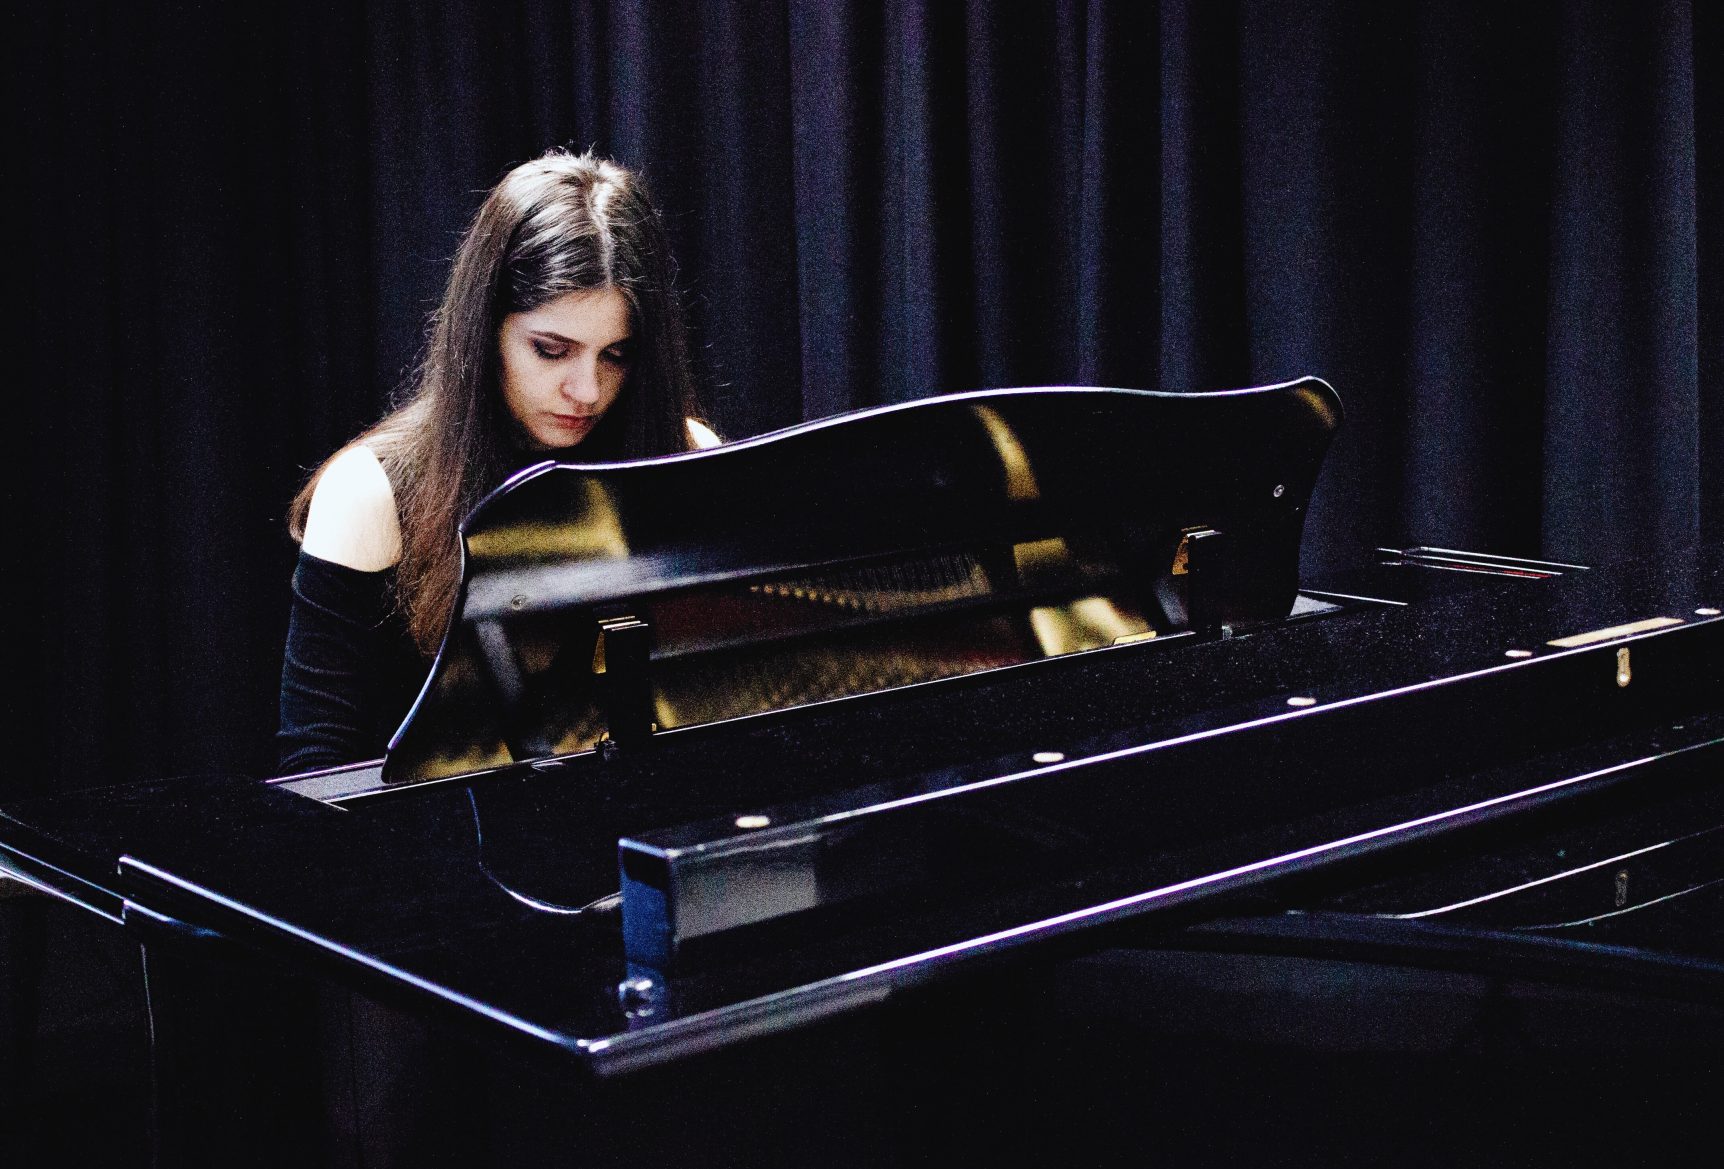 Adina sits behind a black piano in a room with black drapes. She looks down at the keys and her dark hair falls in front of her face.